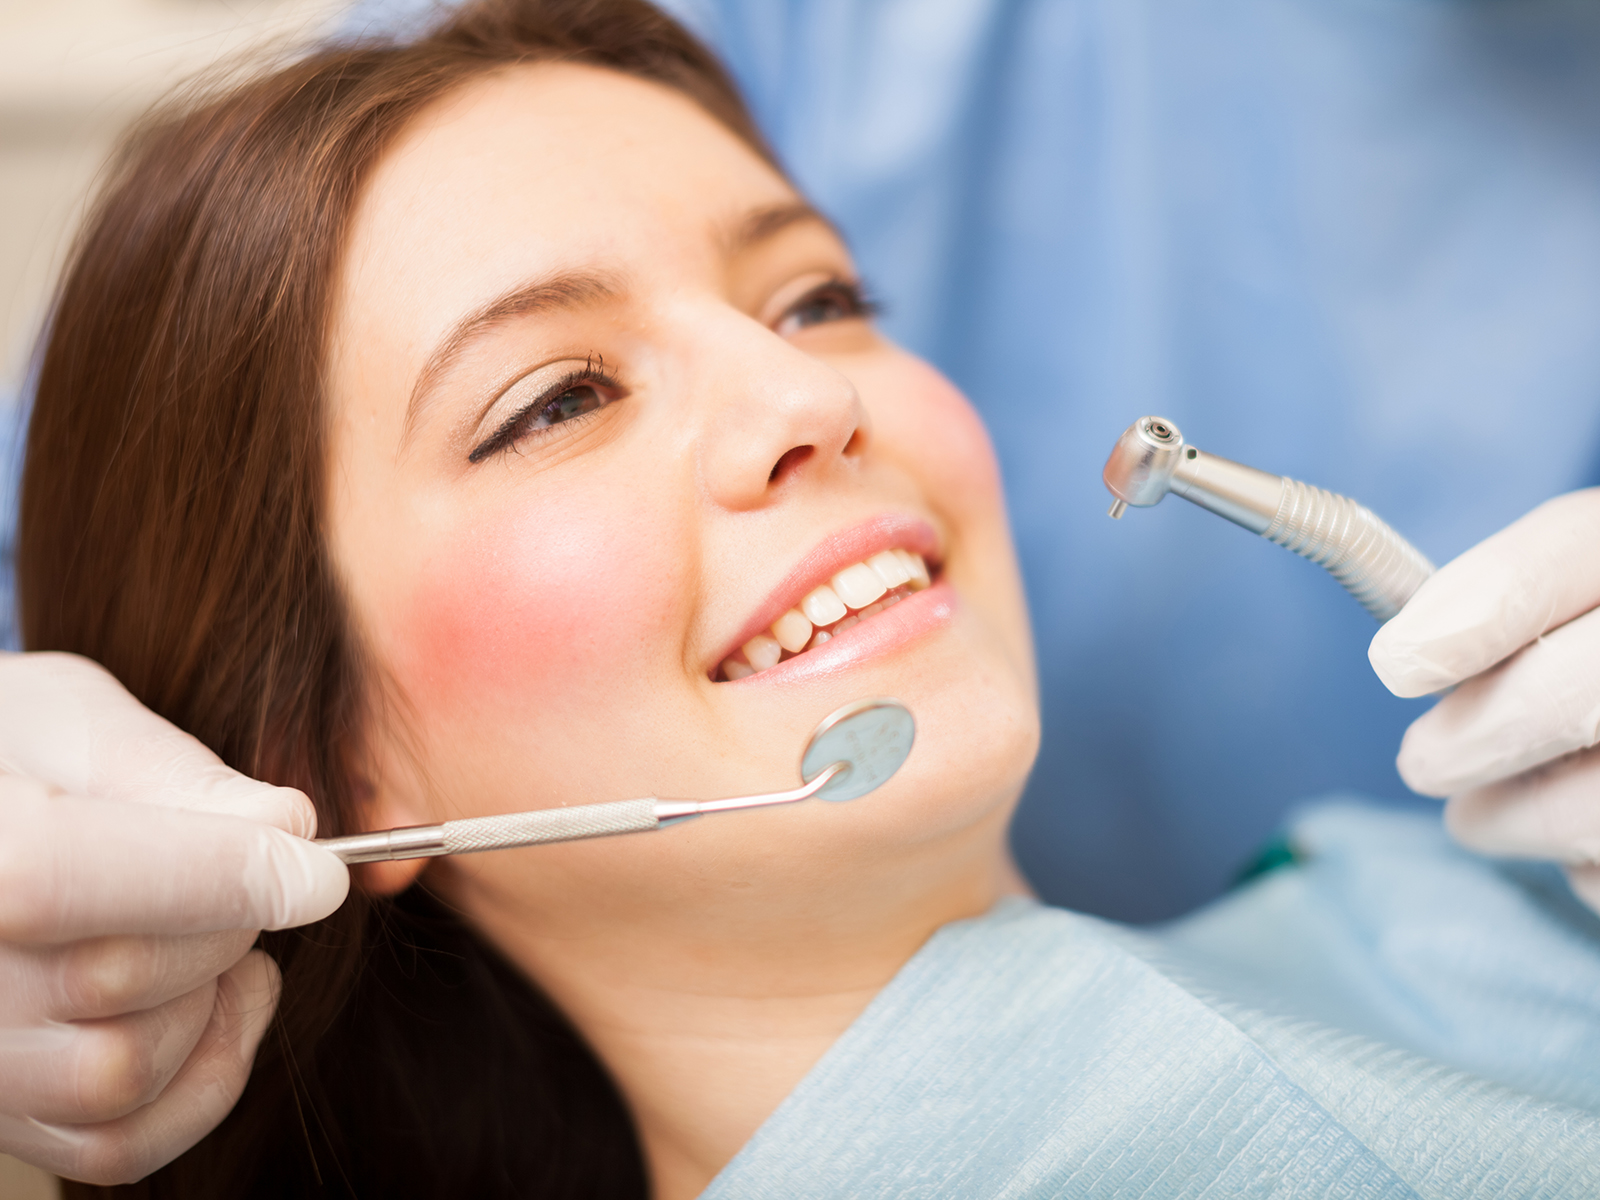 What are the side effects of root canal treatment?